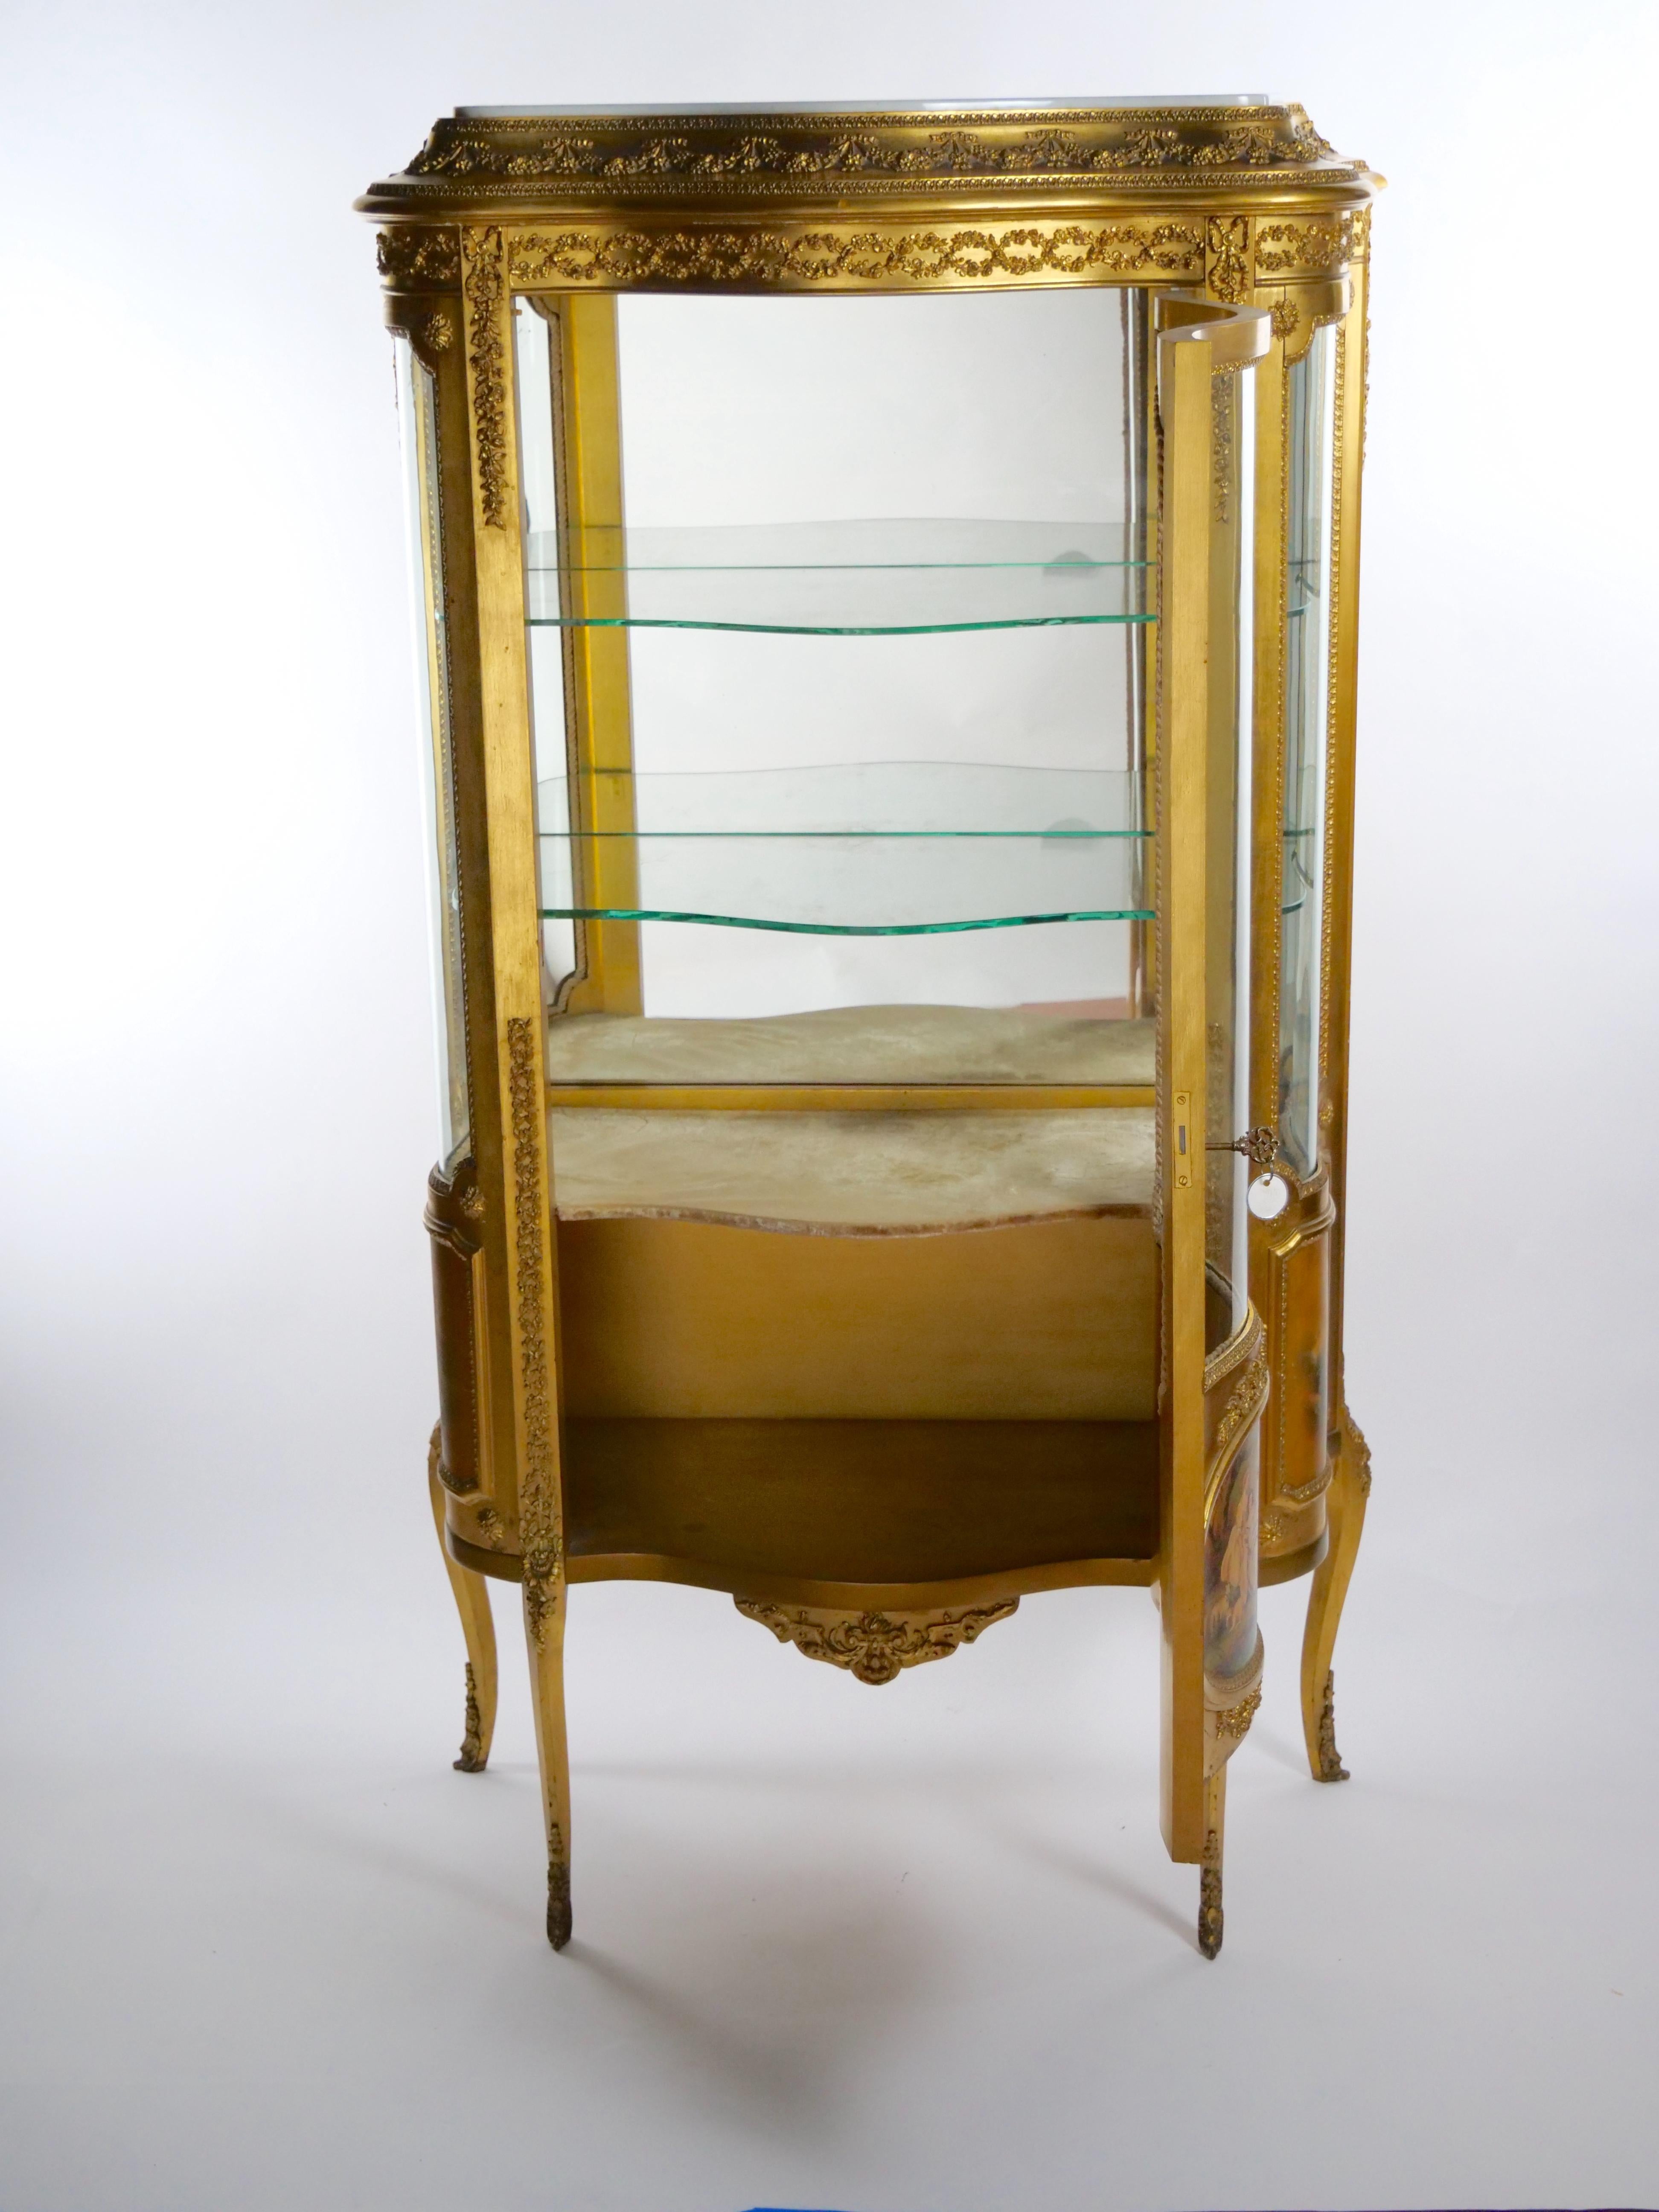 Elegant early 20th century hand painted and gilt gold decorated showcase / display cabinet. The showcase features an oval and rounded painted wood side with glass panels, lacquered, gilded and hand painted wood with very pleasant courtship scene